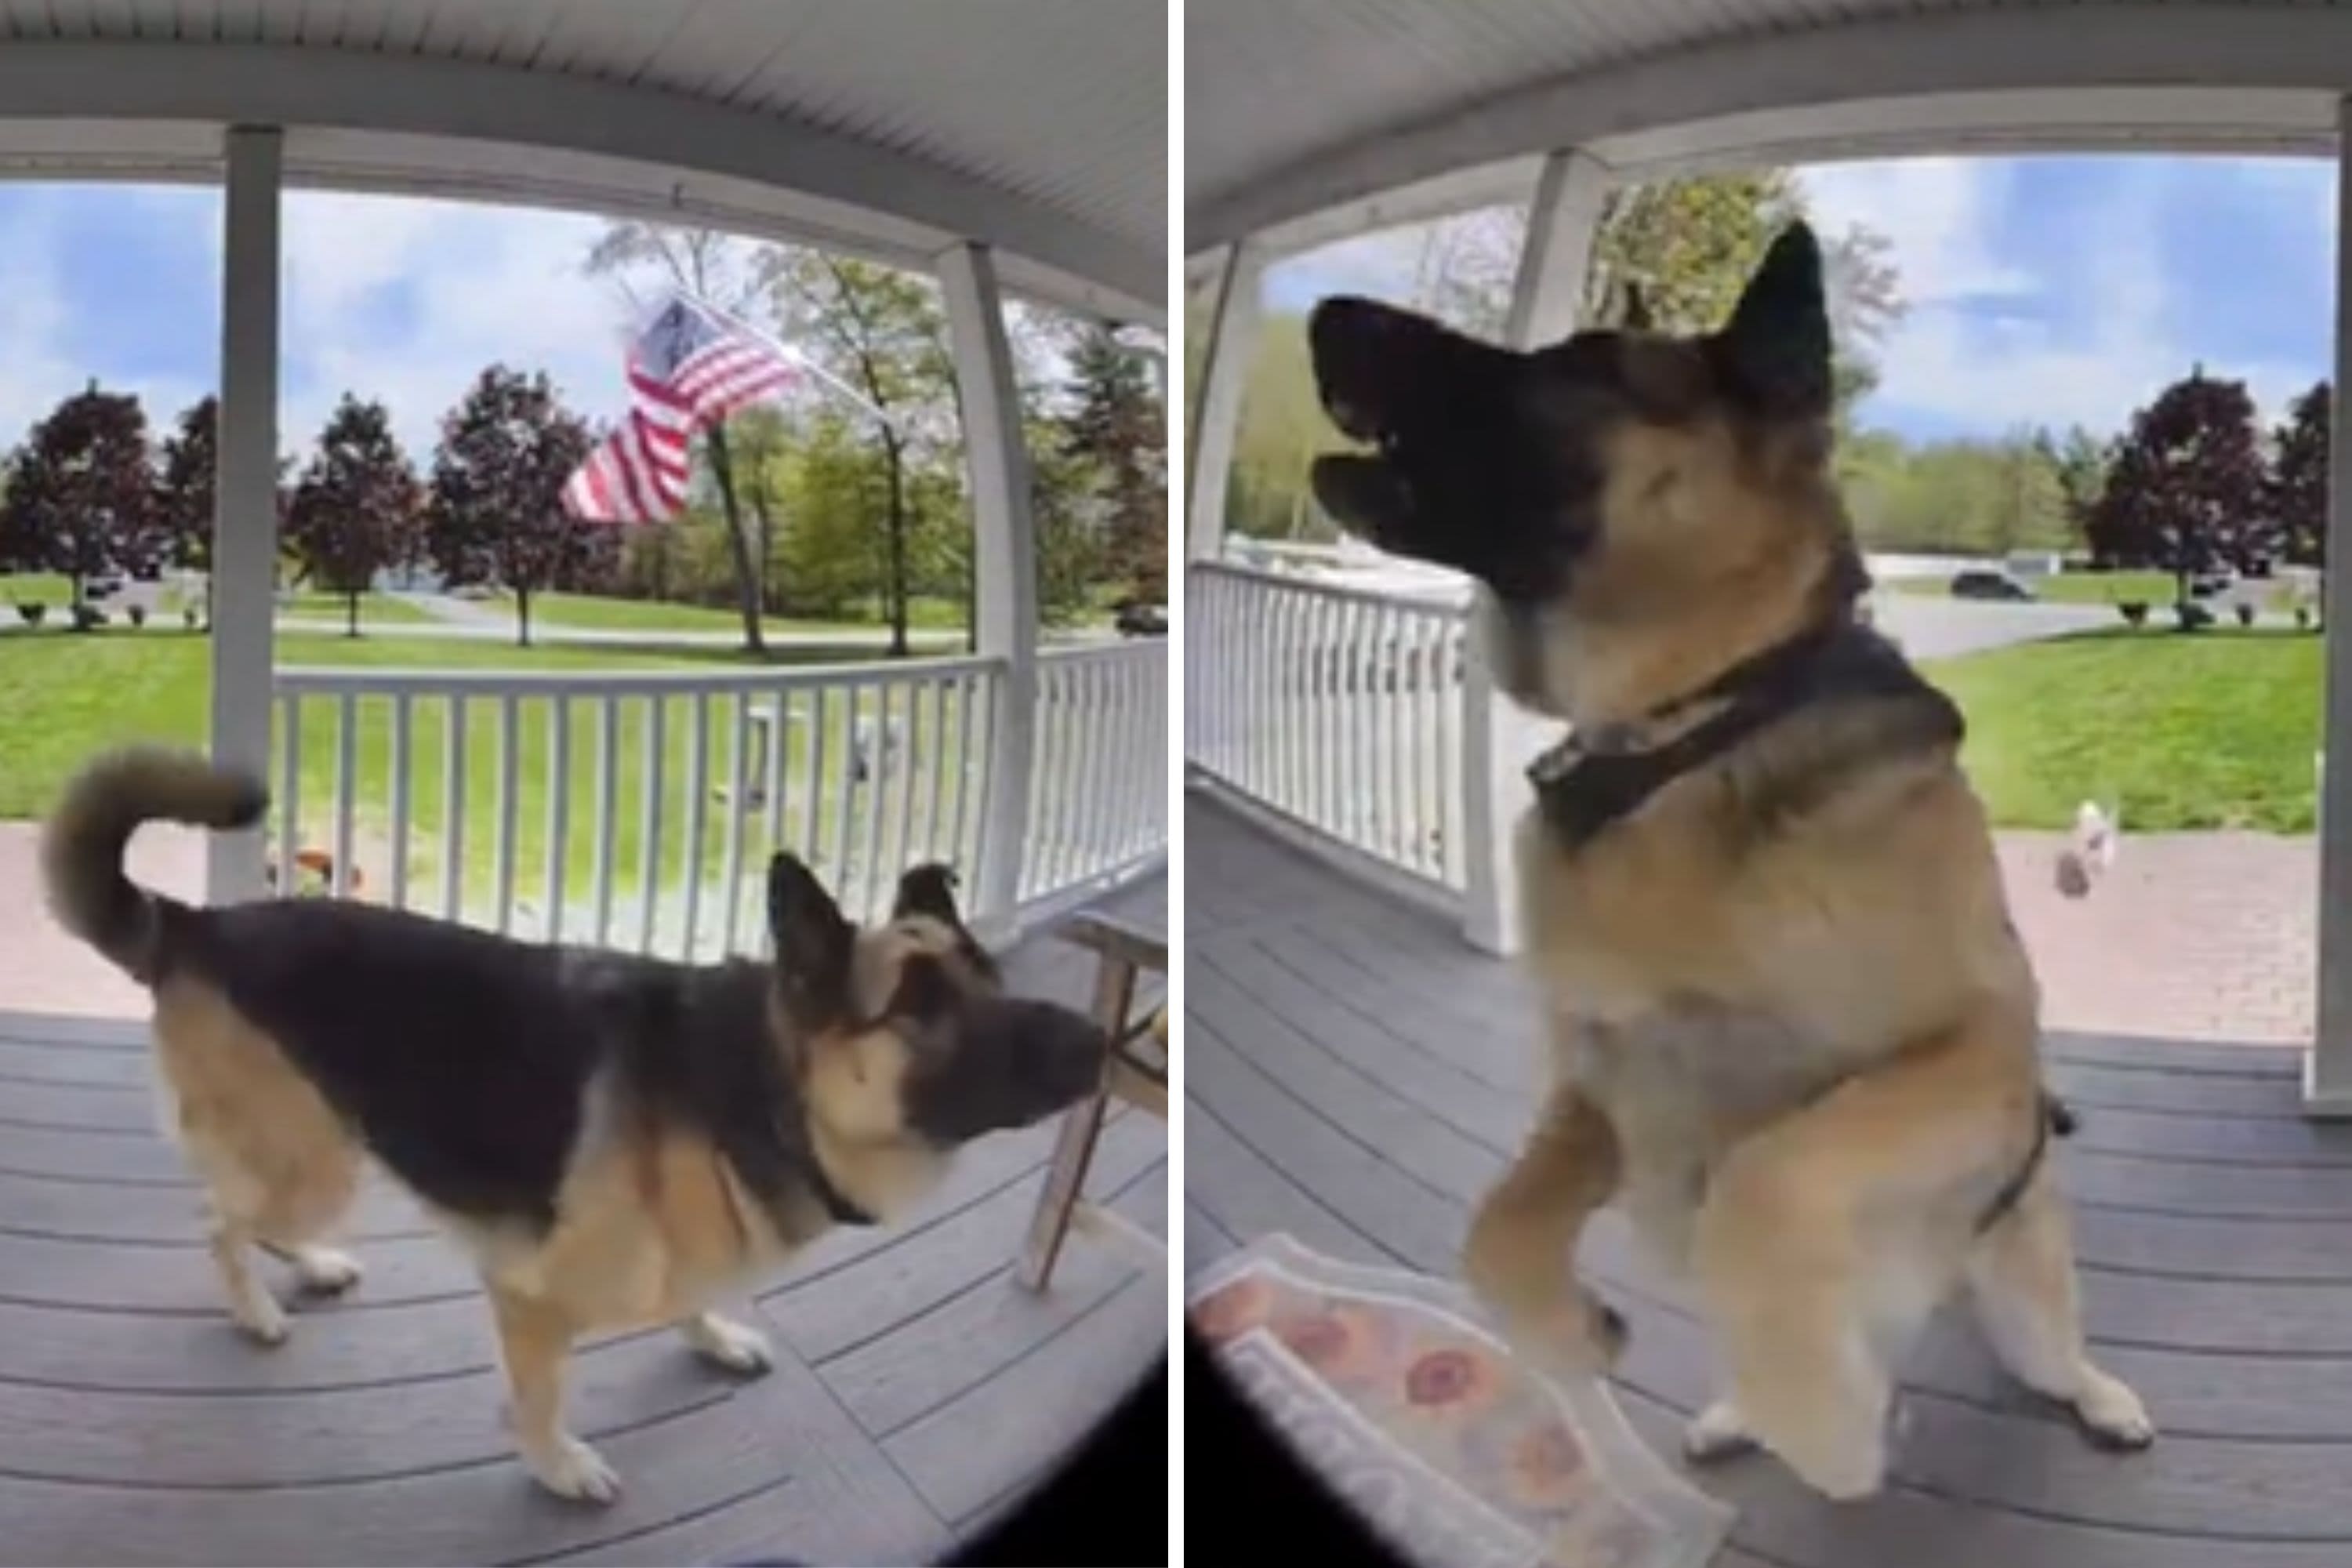 Doorbell cam captures dog "protecting the family" from unlikely intruder